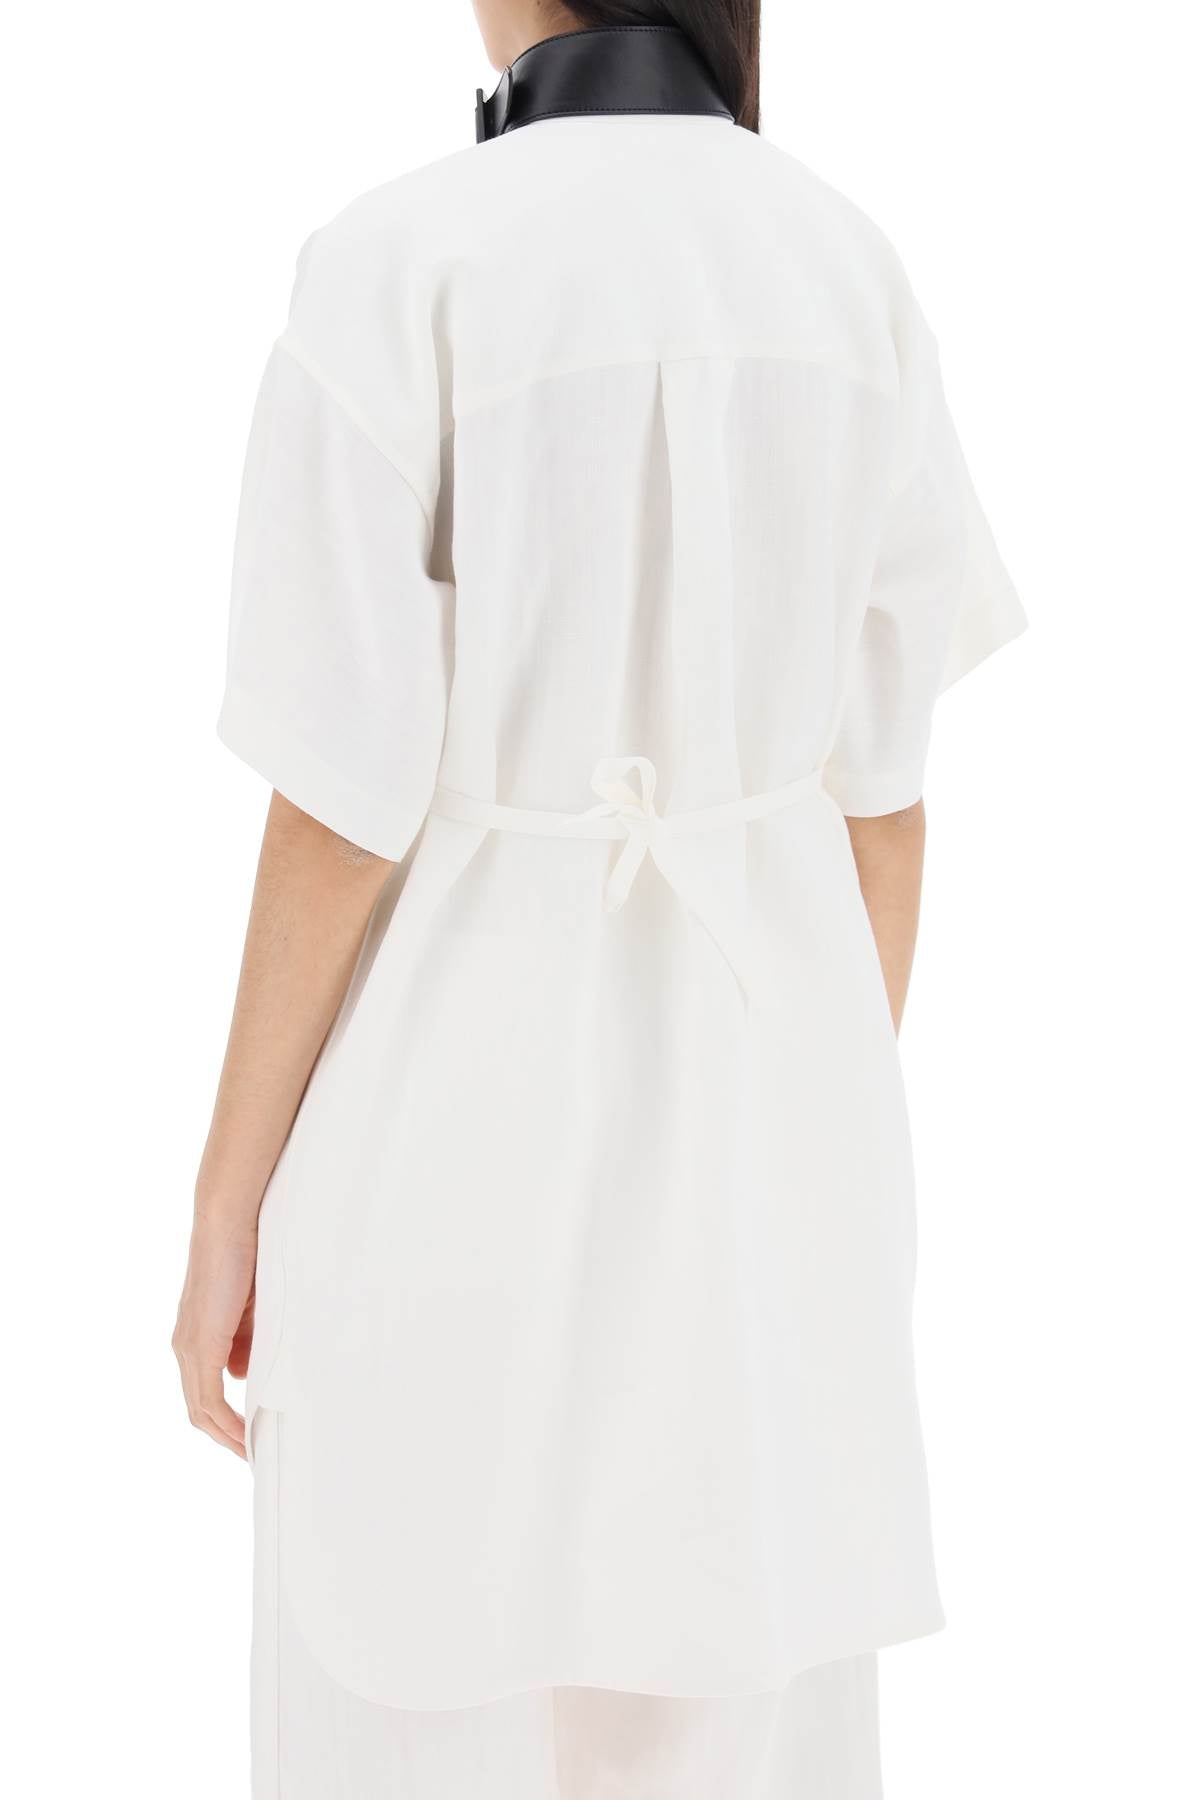 White Midi Chemisier Dress with Faux Leather Strap and Buckle